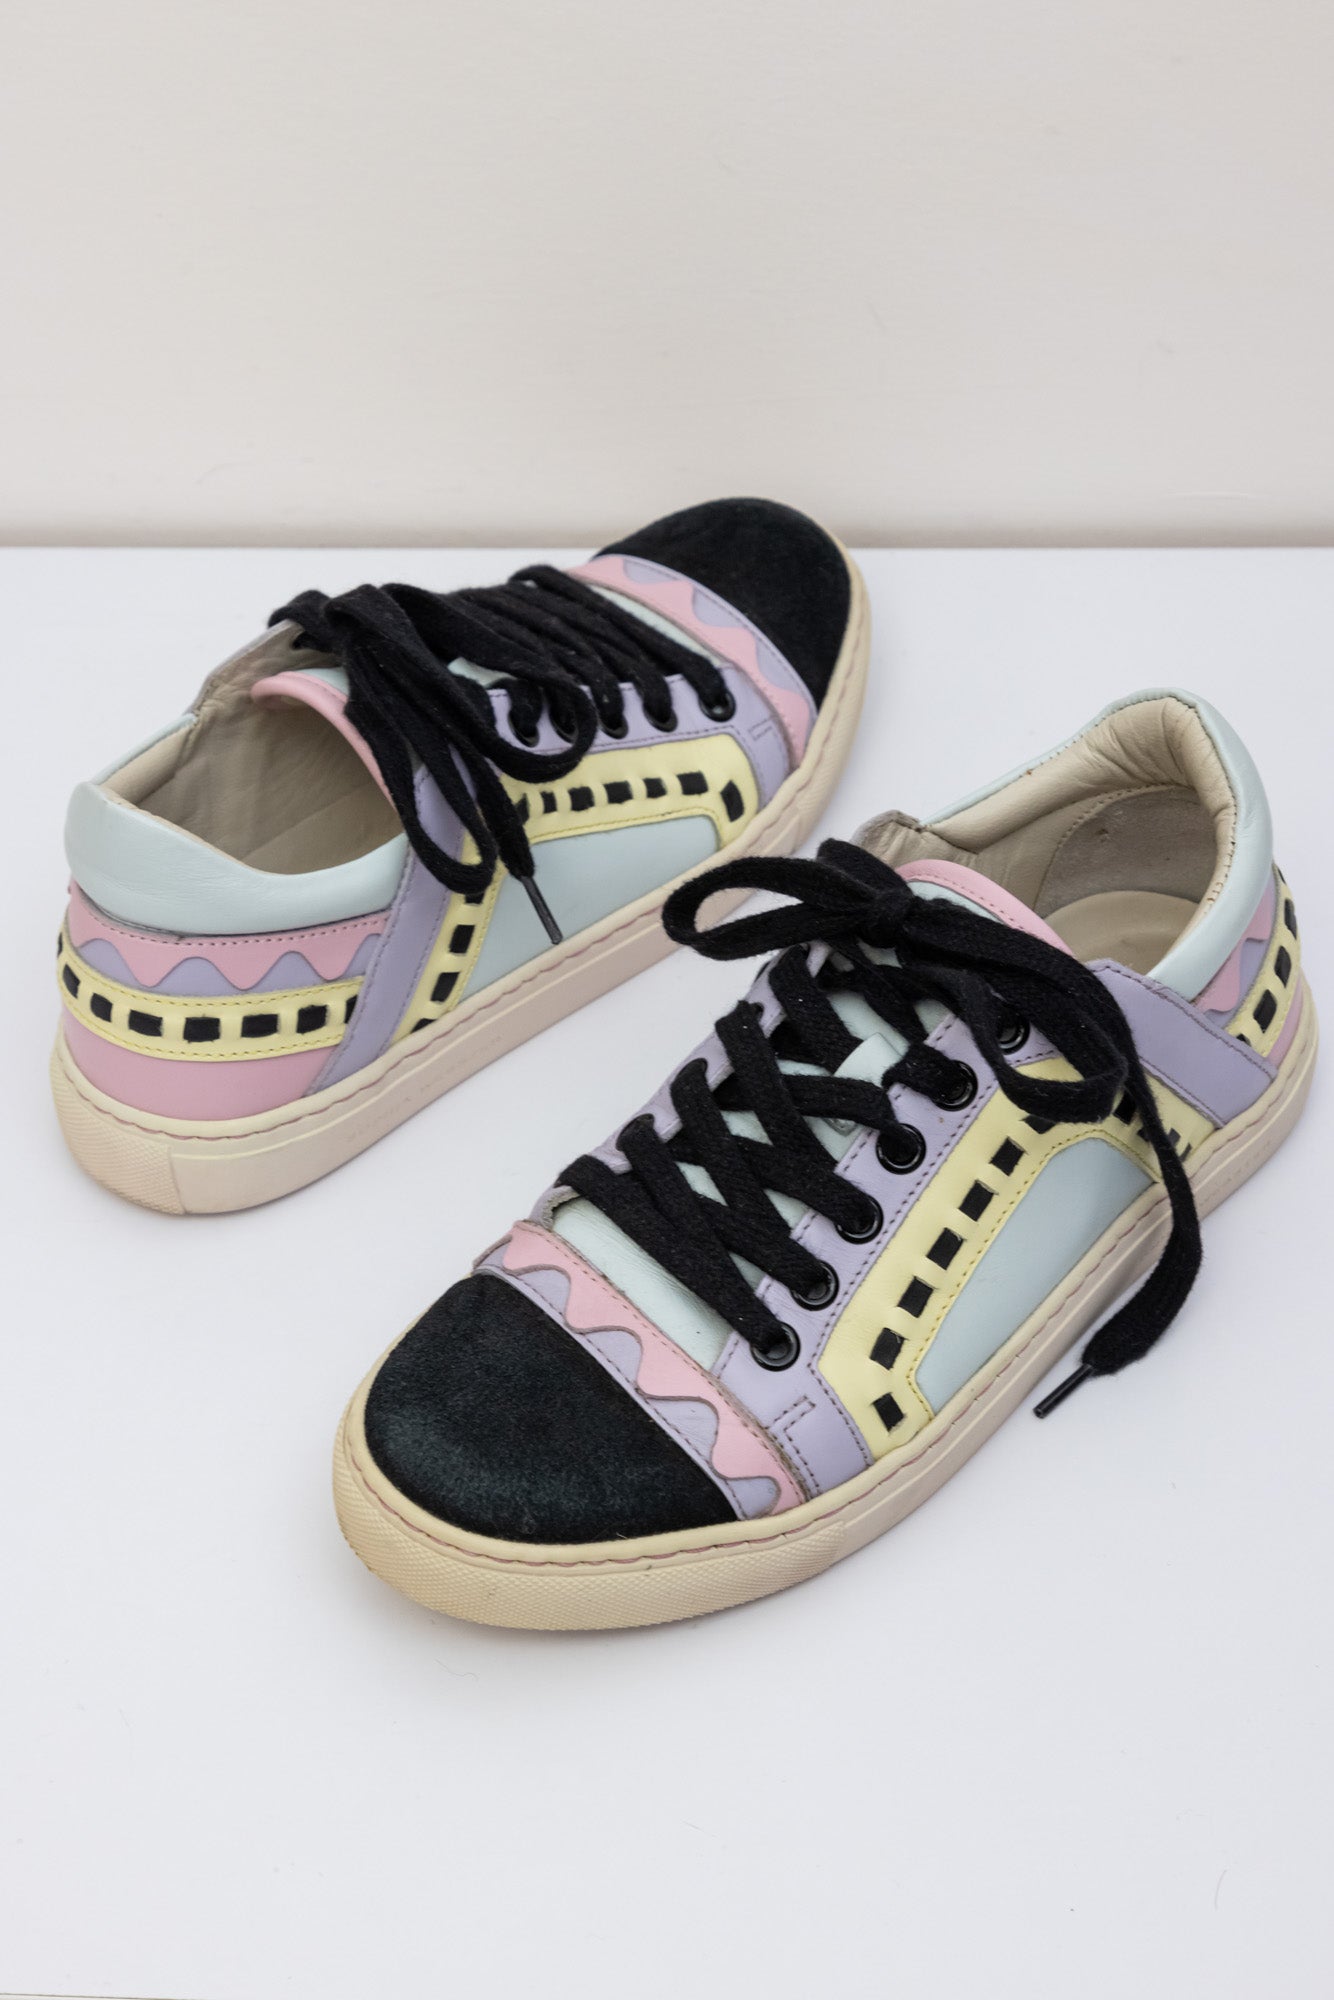 Sophia Webster Multicolour Leather Trainers Size 36.5 | Stylish and Comfortable Footwear